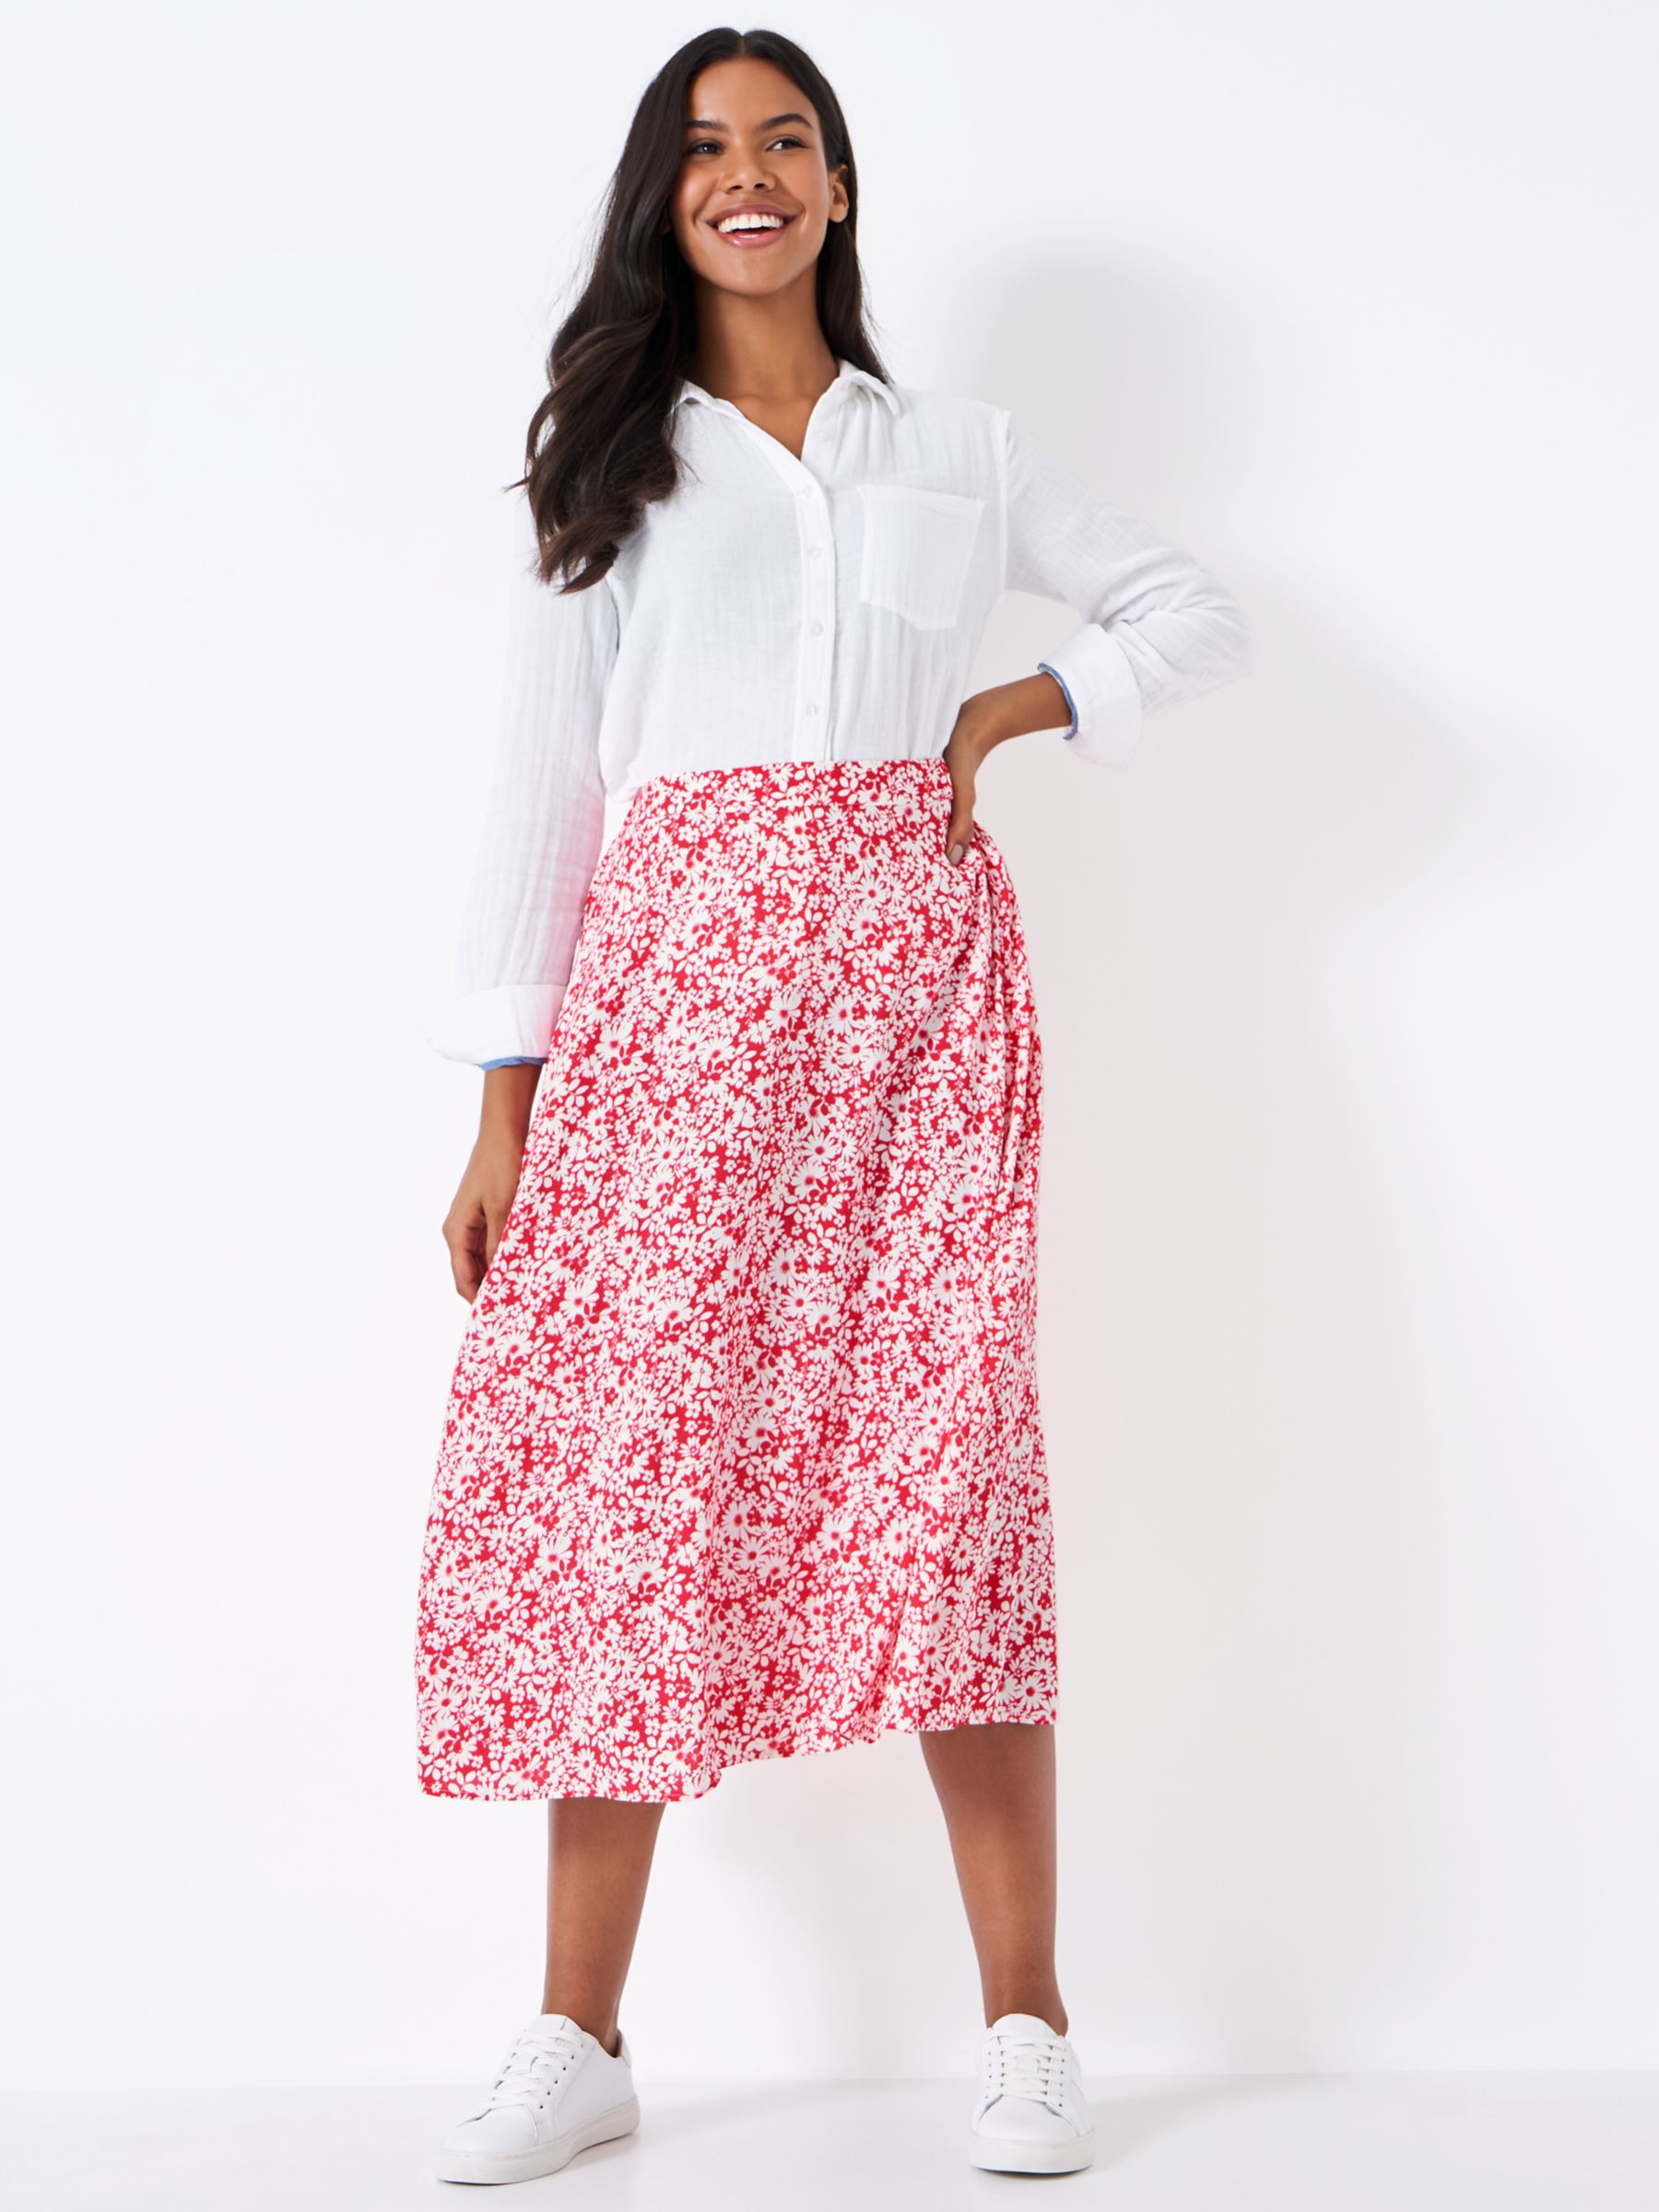 Buy Crew Clothing Amber Floral Skirt, Red Wine Online at johnlewis.com